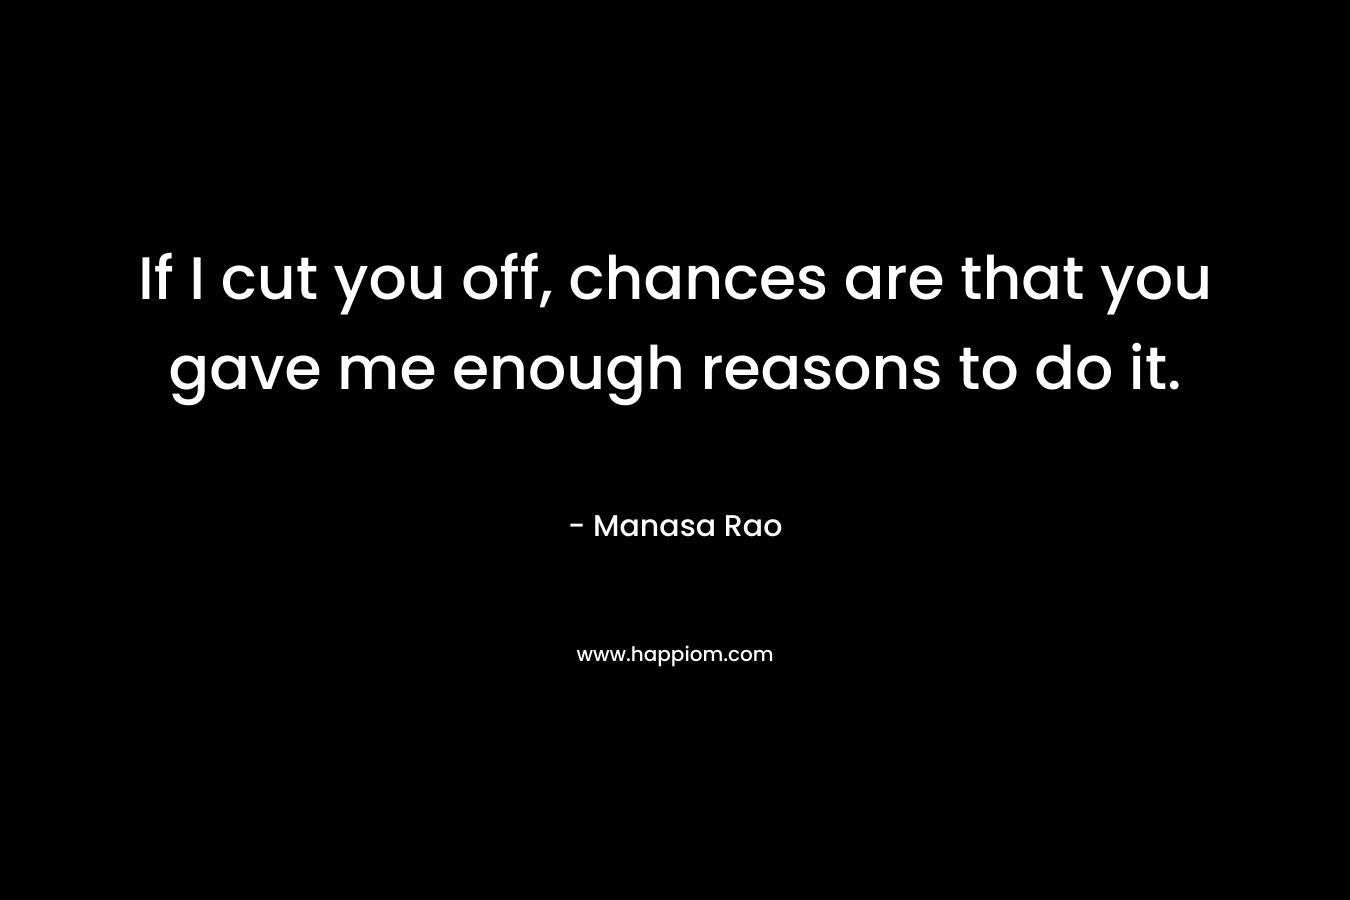 If I cut you off, chances are that you gave me enough reasons to do it.